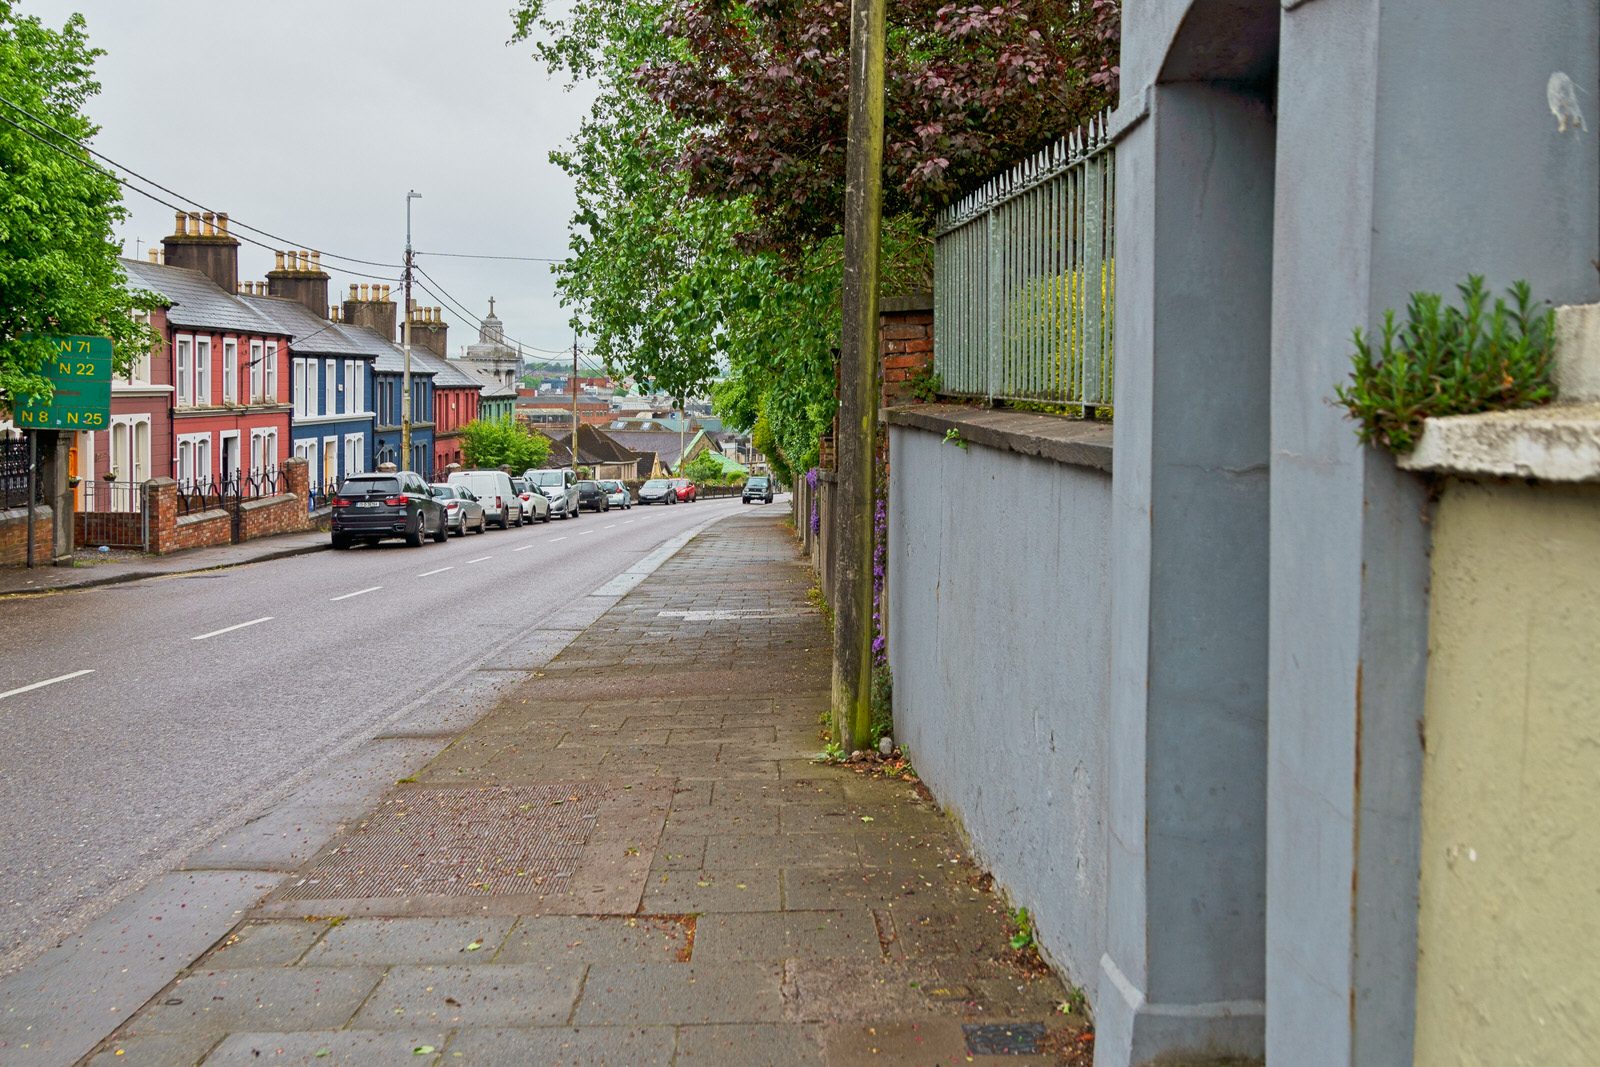 A WALK ALONG SUMMERHILL NORTH [IN CORK EVERYWHERE IS UPHILL OR DOWNHILL]-225793-1